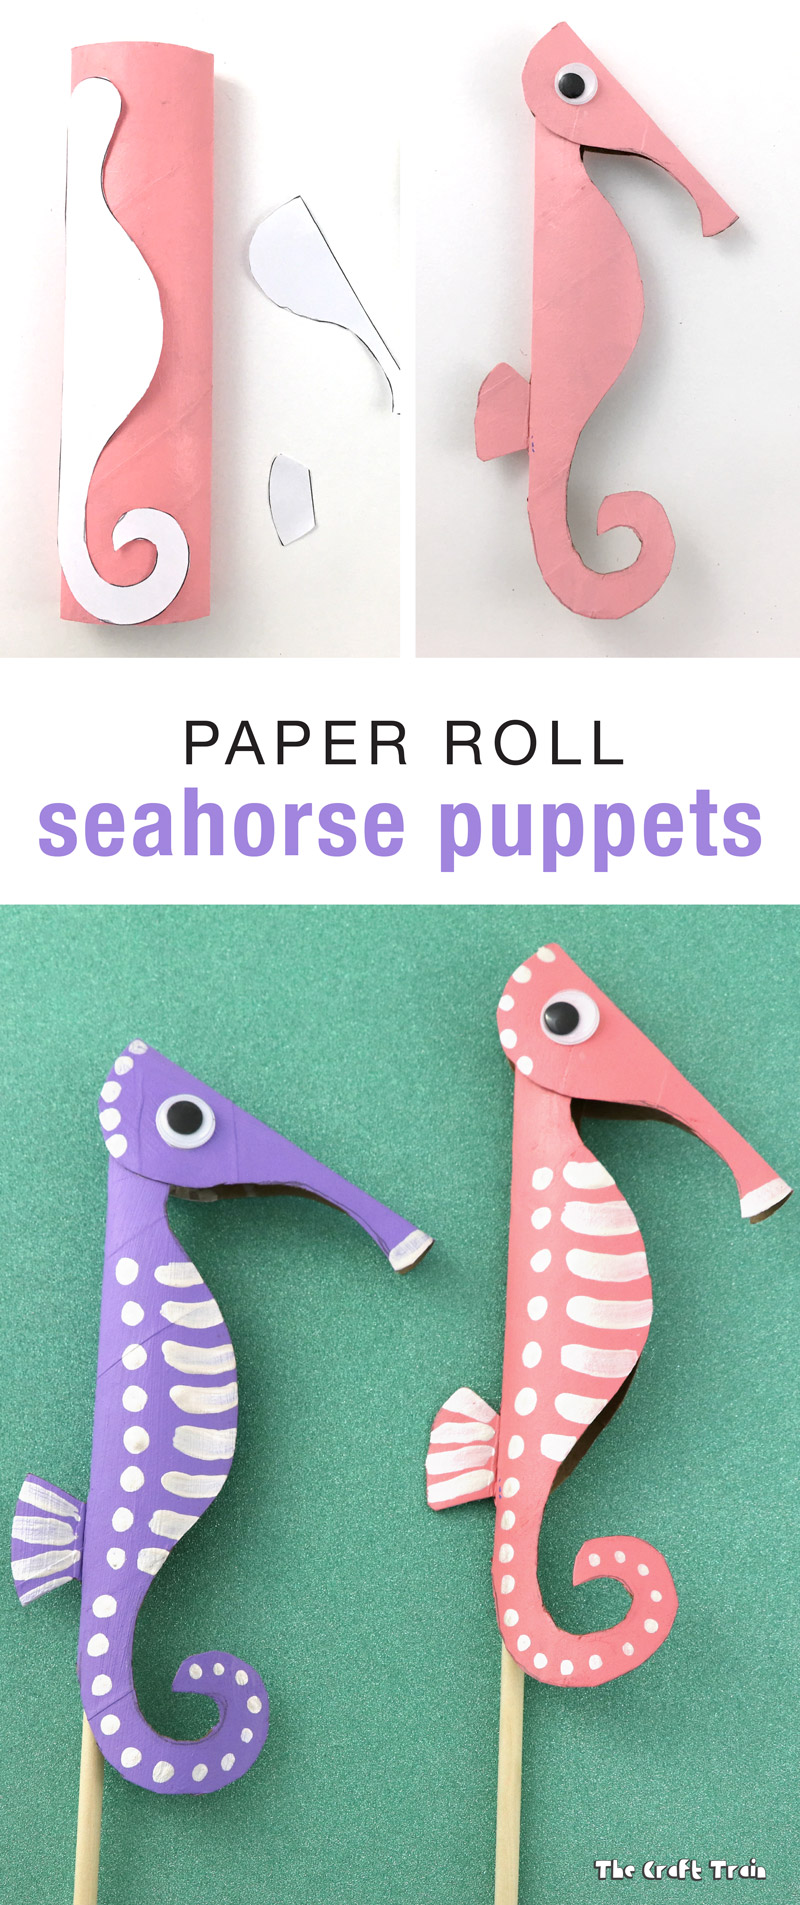 Create adorable seahorse puppets from paper rolls using a flatten and cut technique